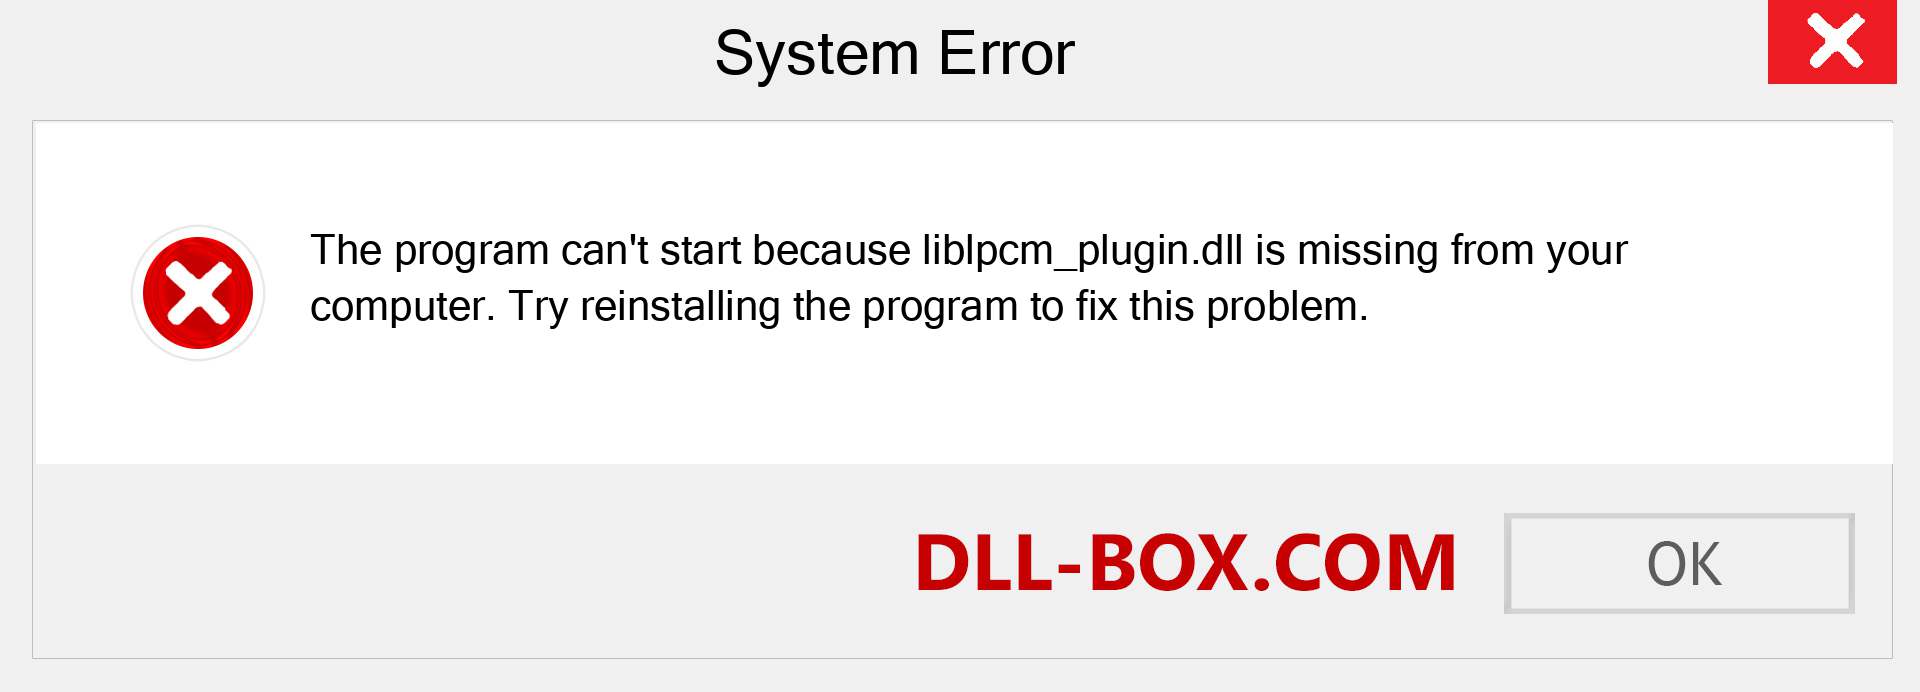  liblpcm_plugin.dll file is missing?. Download for Windows 7, 8, 10 - Fix  liblpcm_plugin dll Missing Error on Windows, photos, images